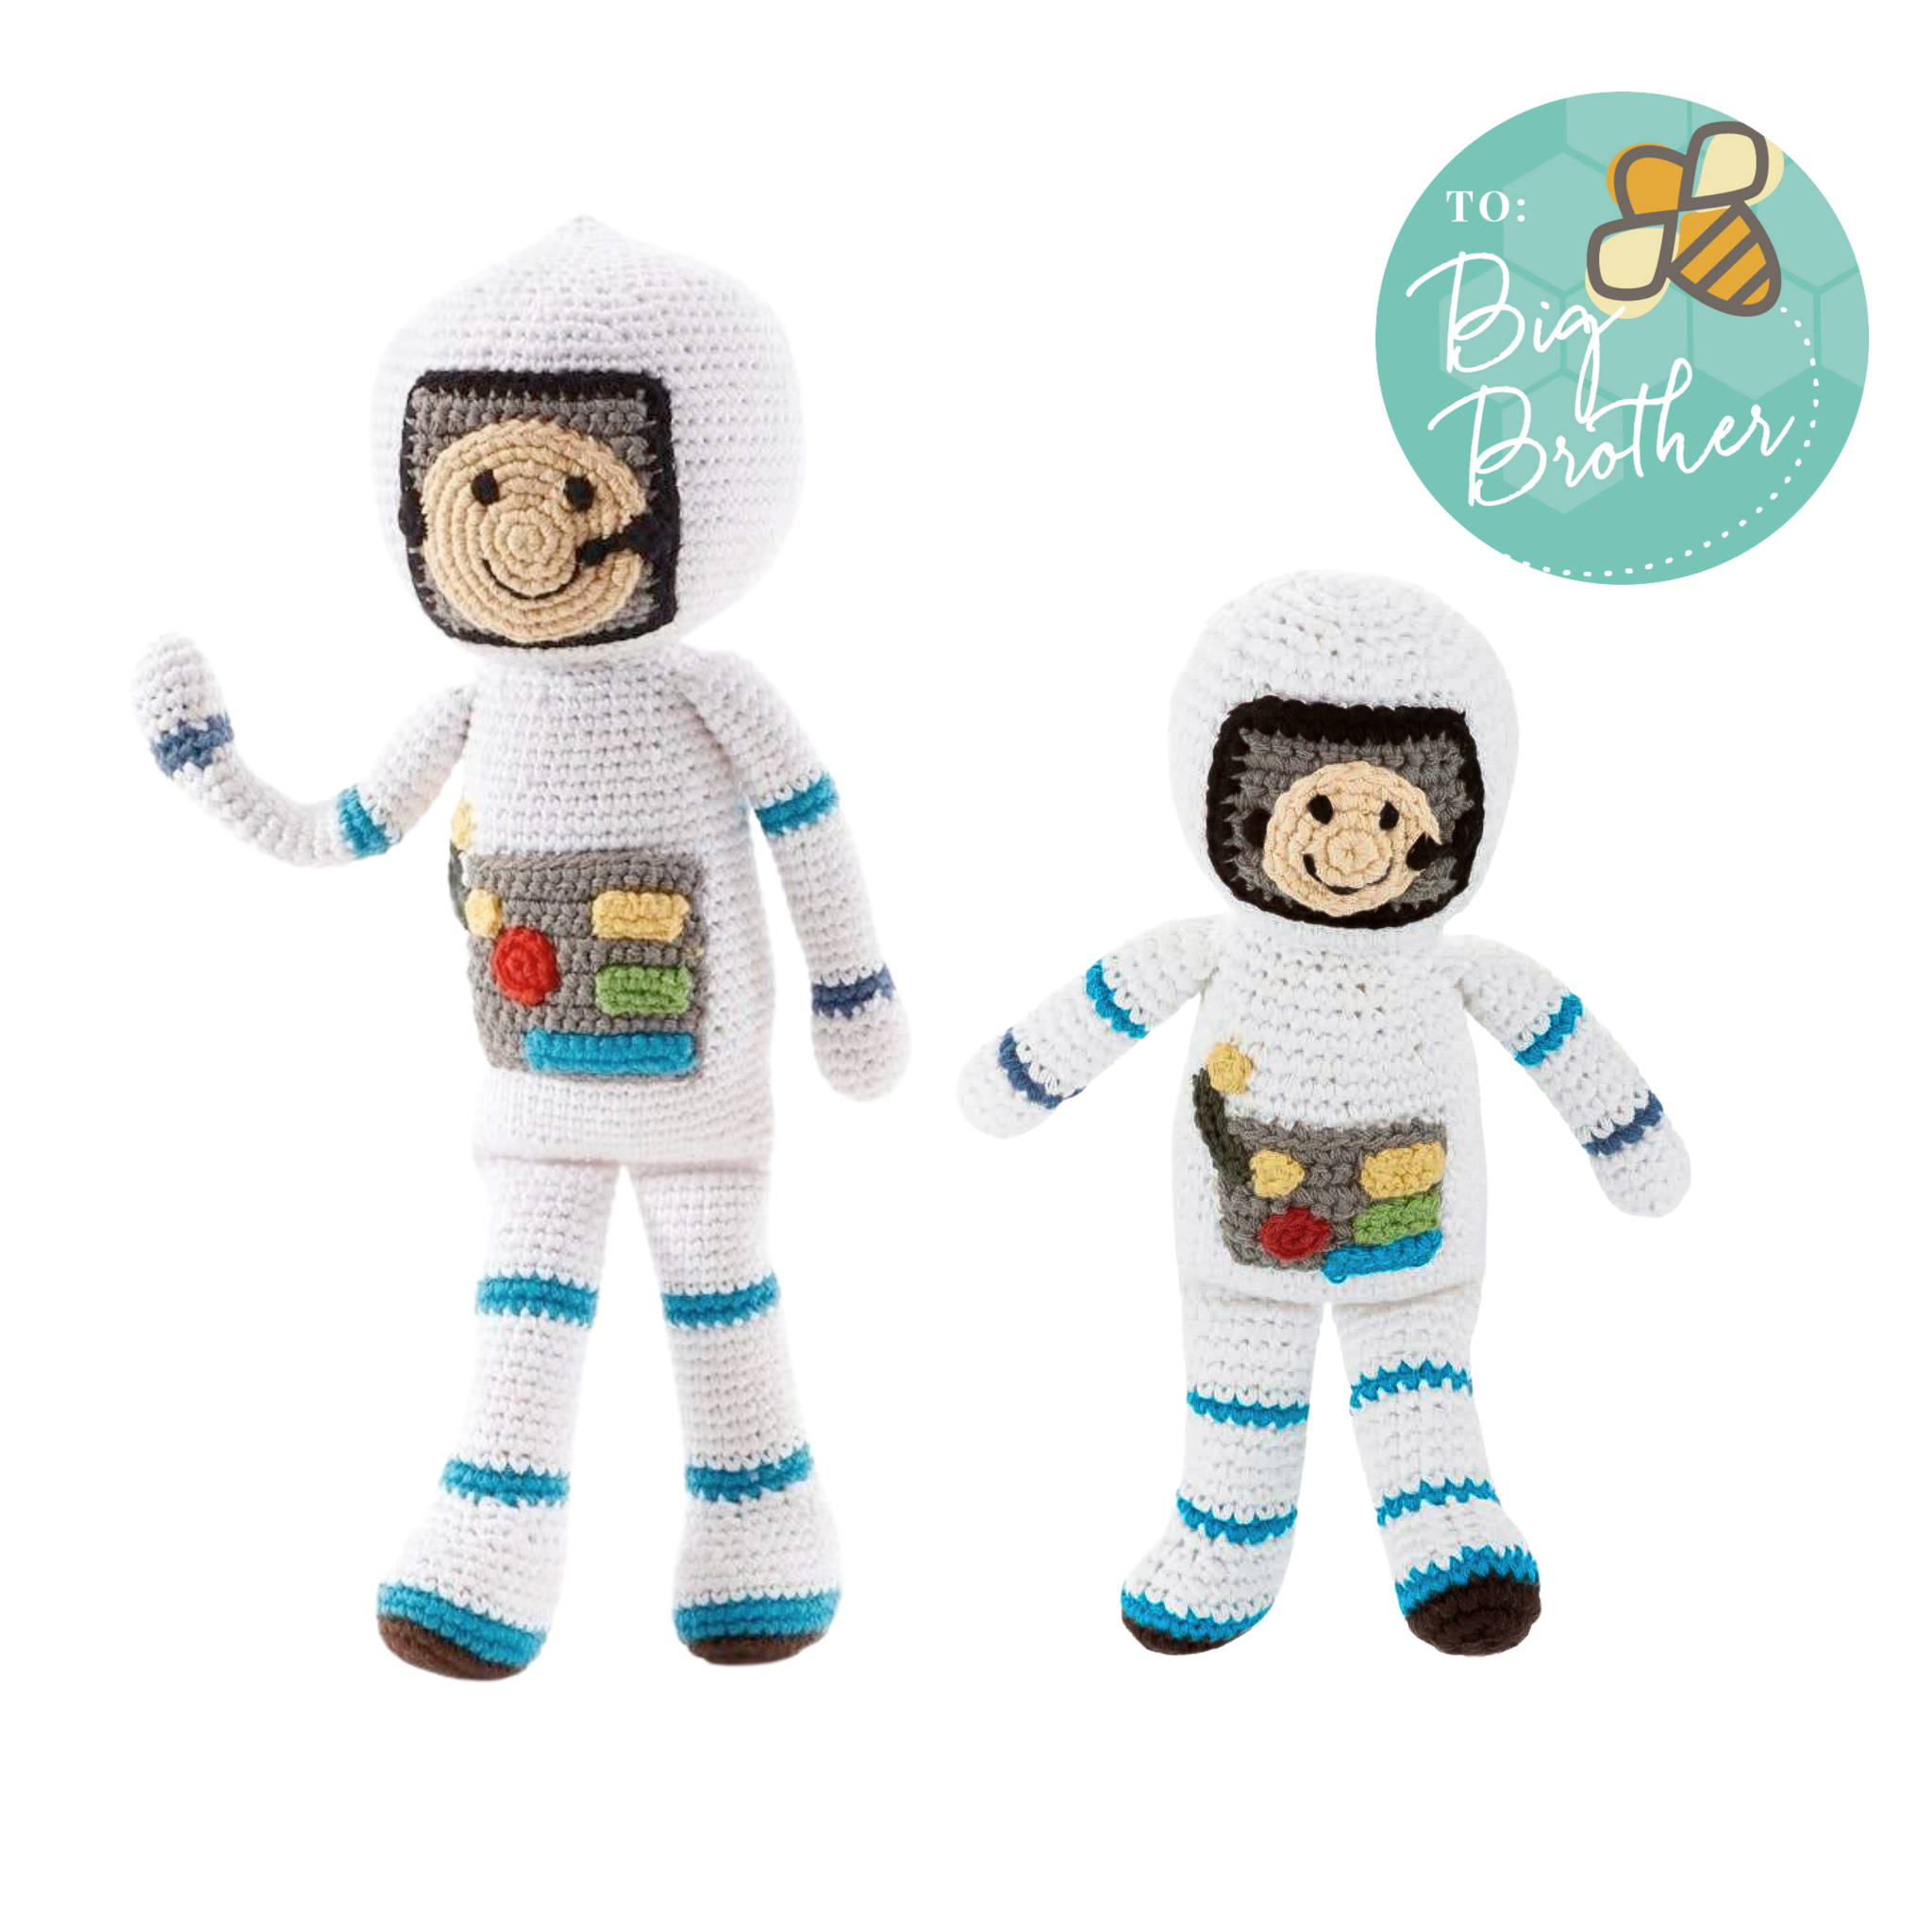 New Sibling Gifts - I'm Over the Moon For You - HoneyBug 